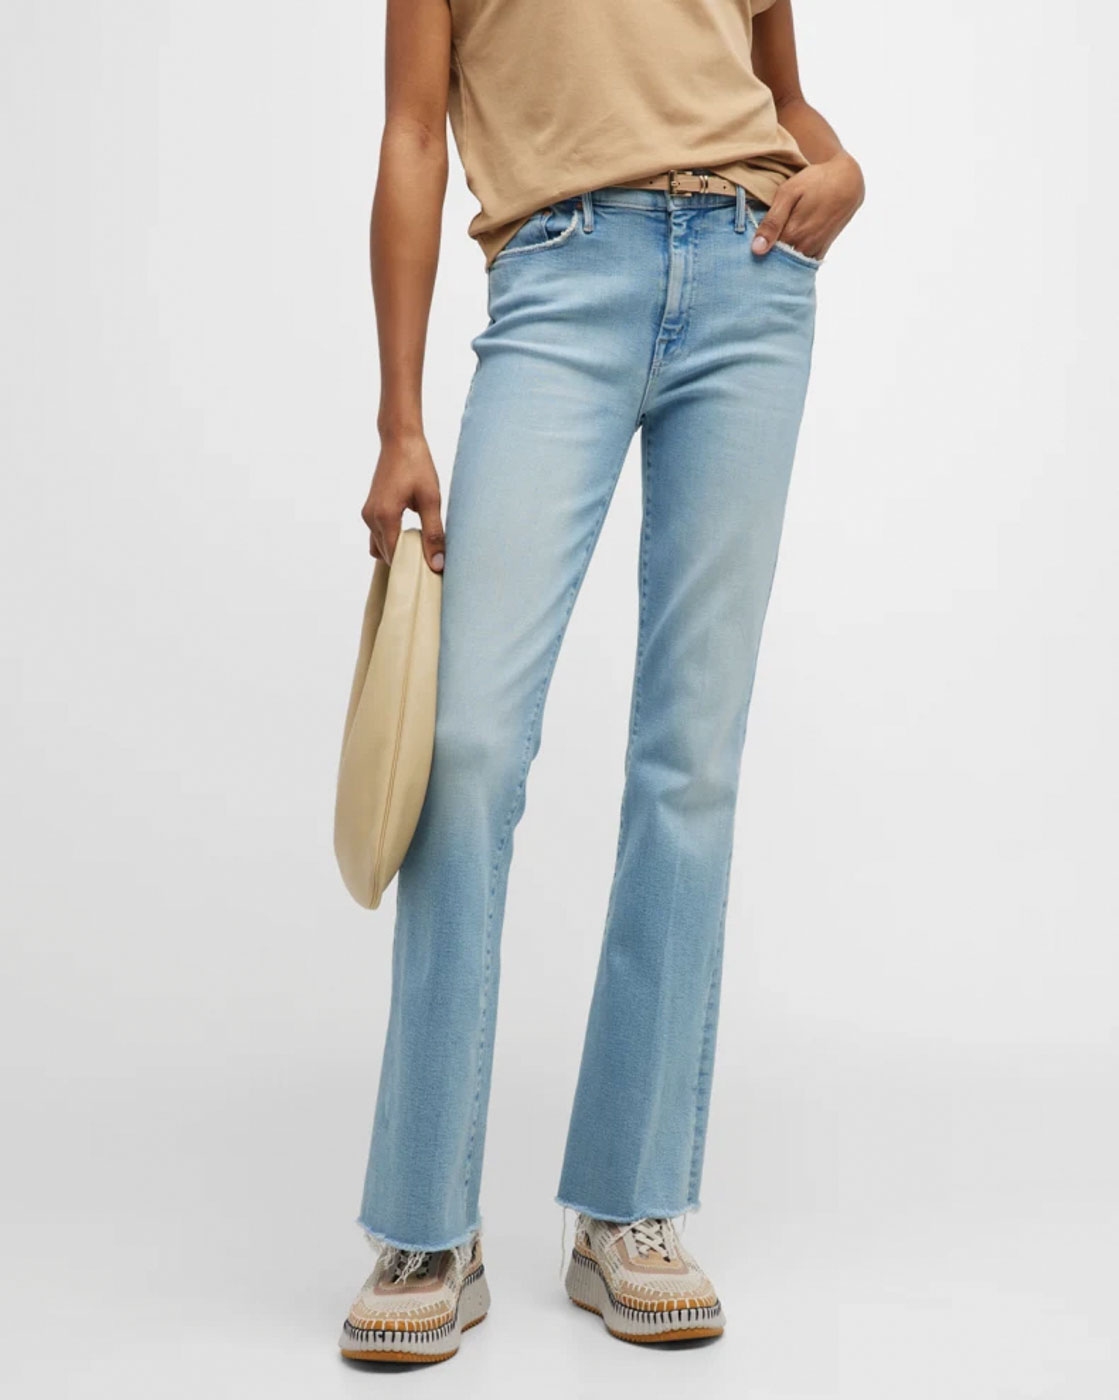 36 Mother The Weekender Fray Jeans $238 Neimanmarcus.com